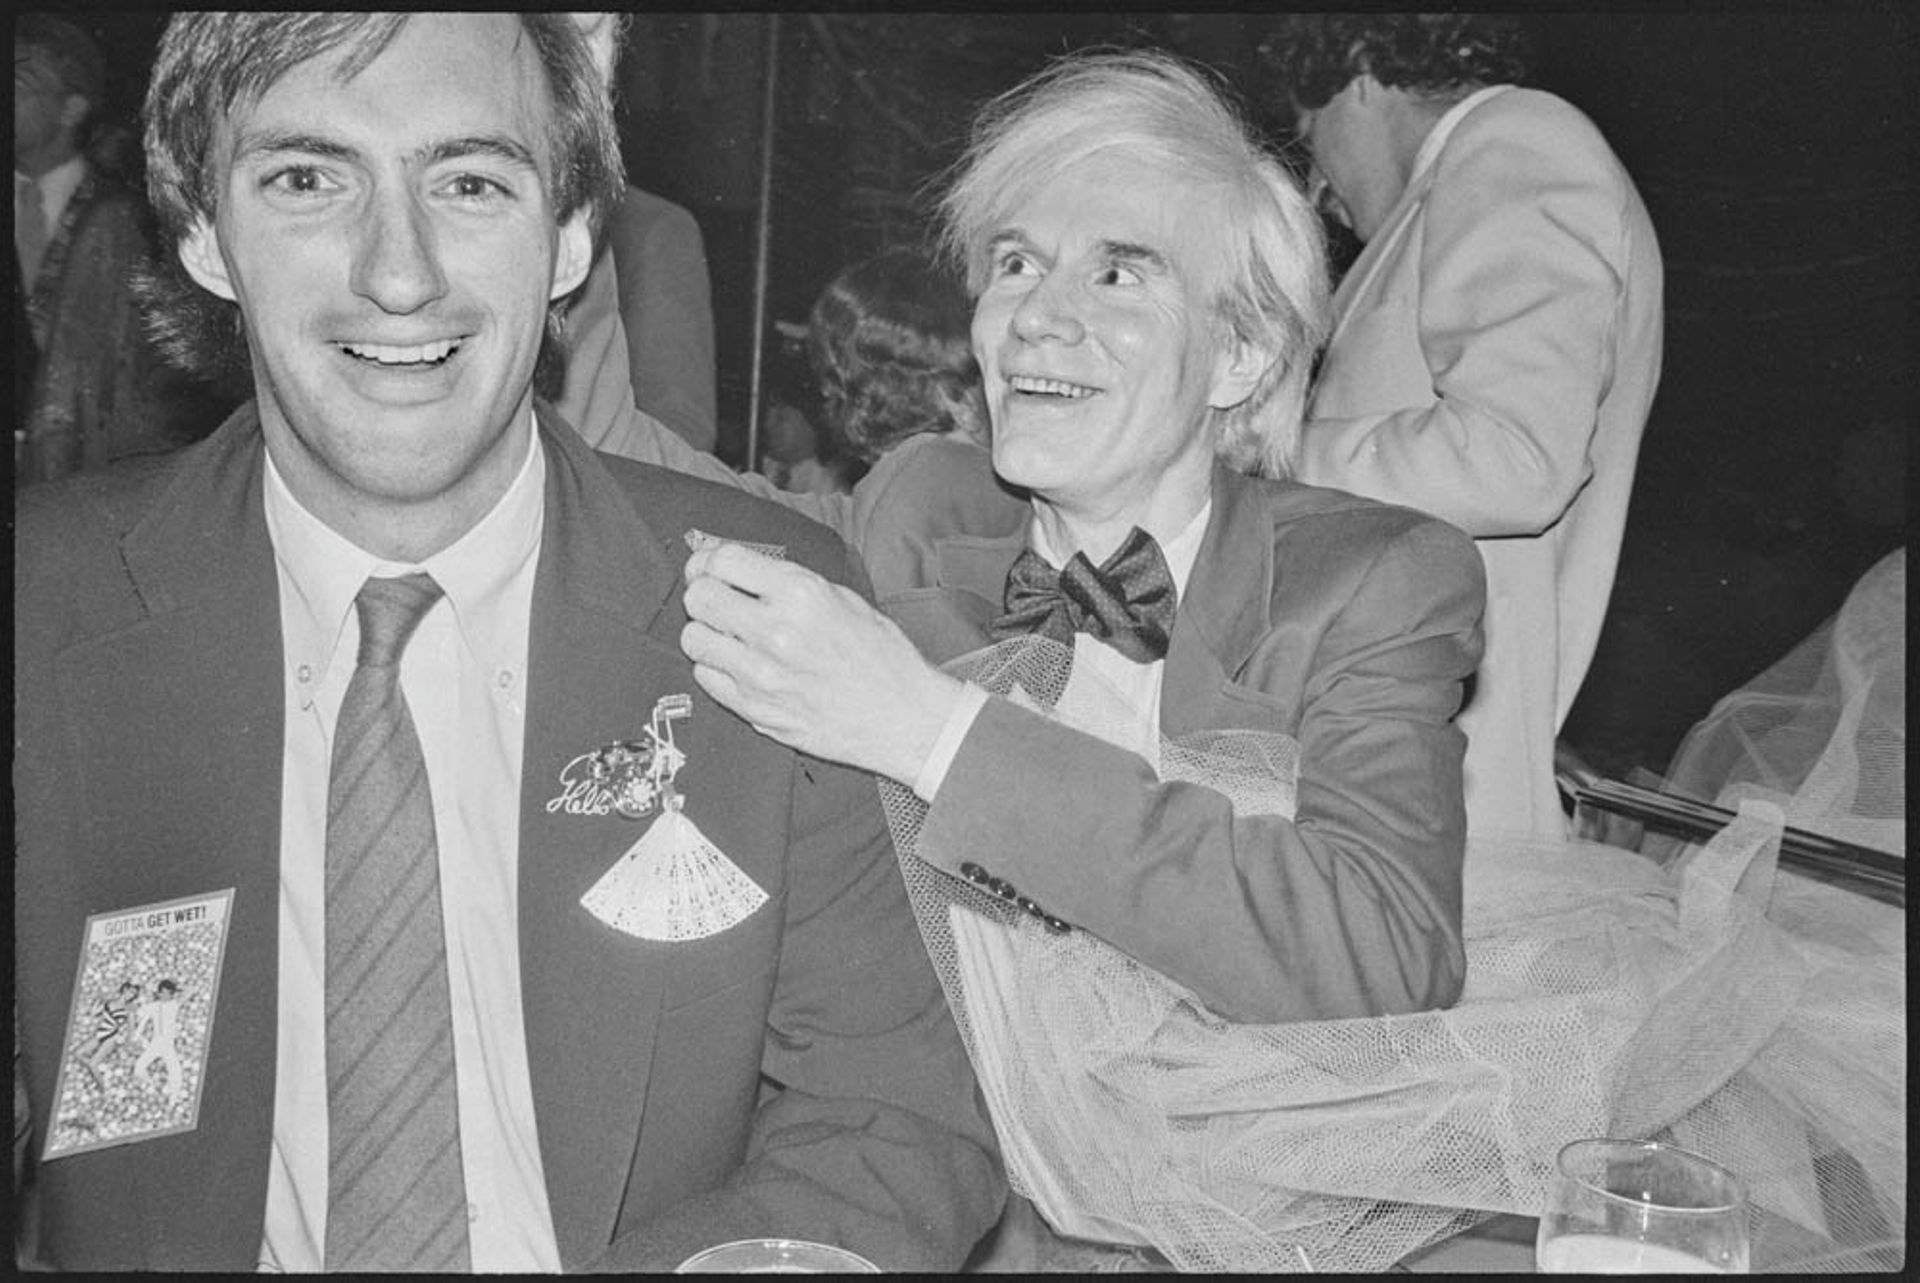 The Netflix series explores how, contrary to the asexual persona that Warhol cultivated, he had a number of long-term relationships with men—including Jon Gould.